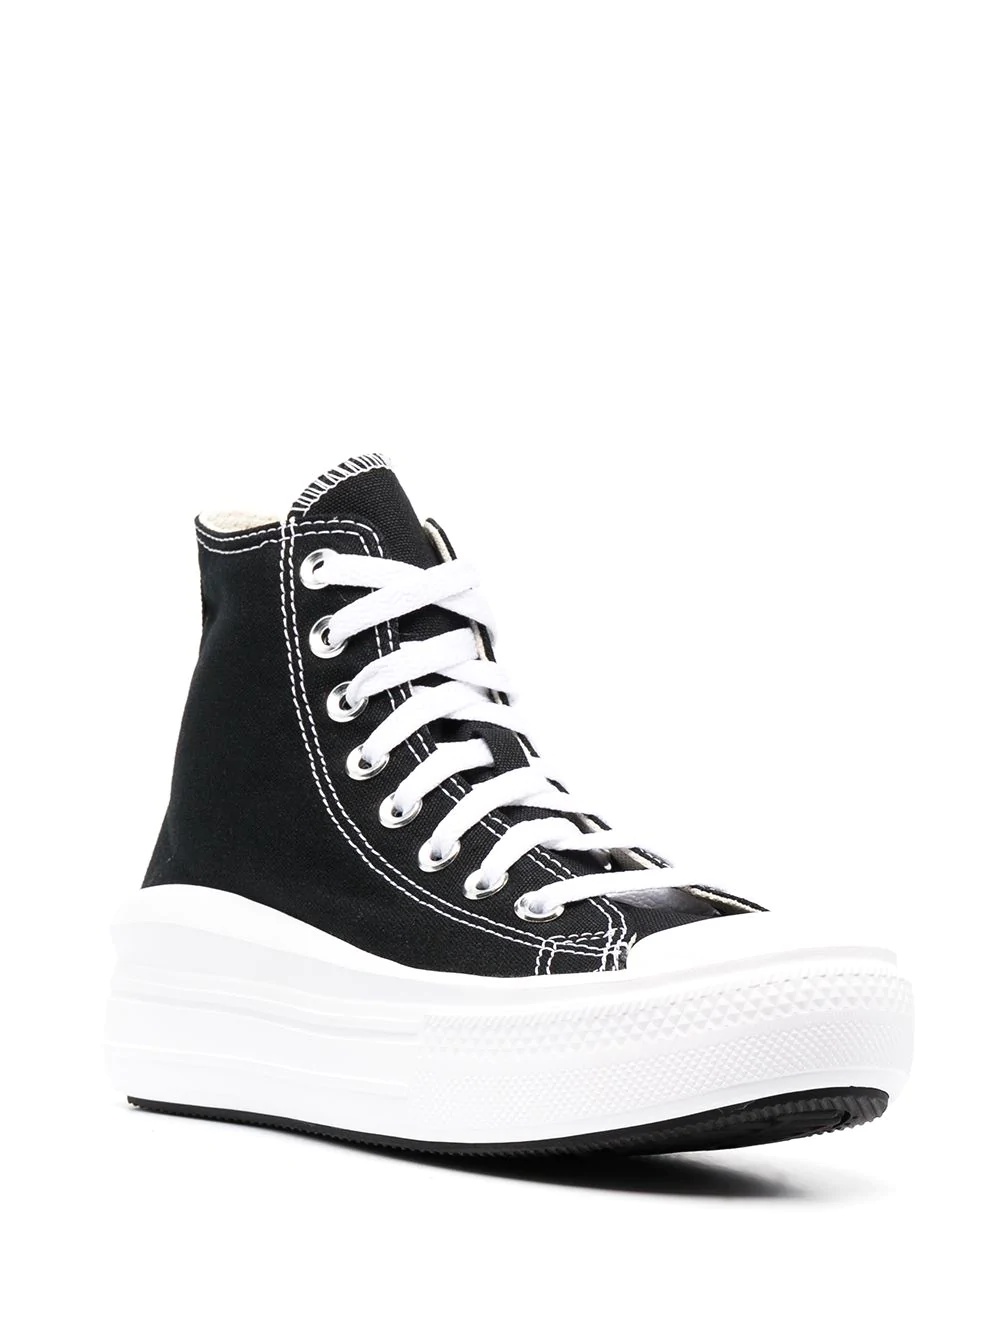 All Star Move high top sneakers - 2